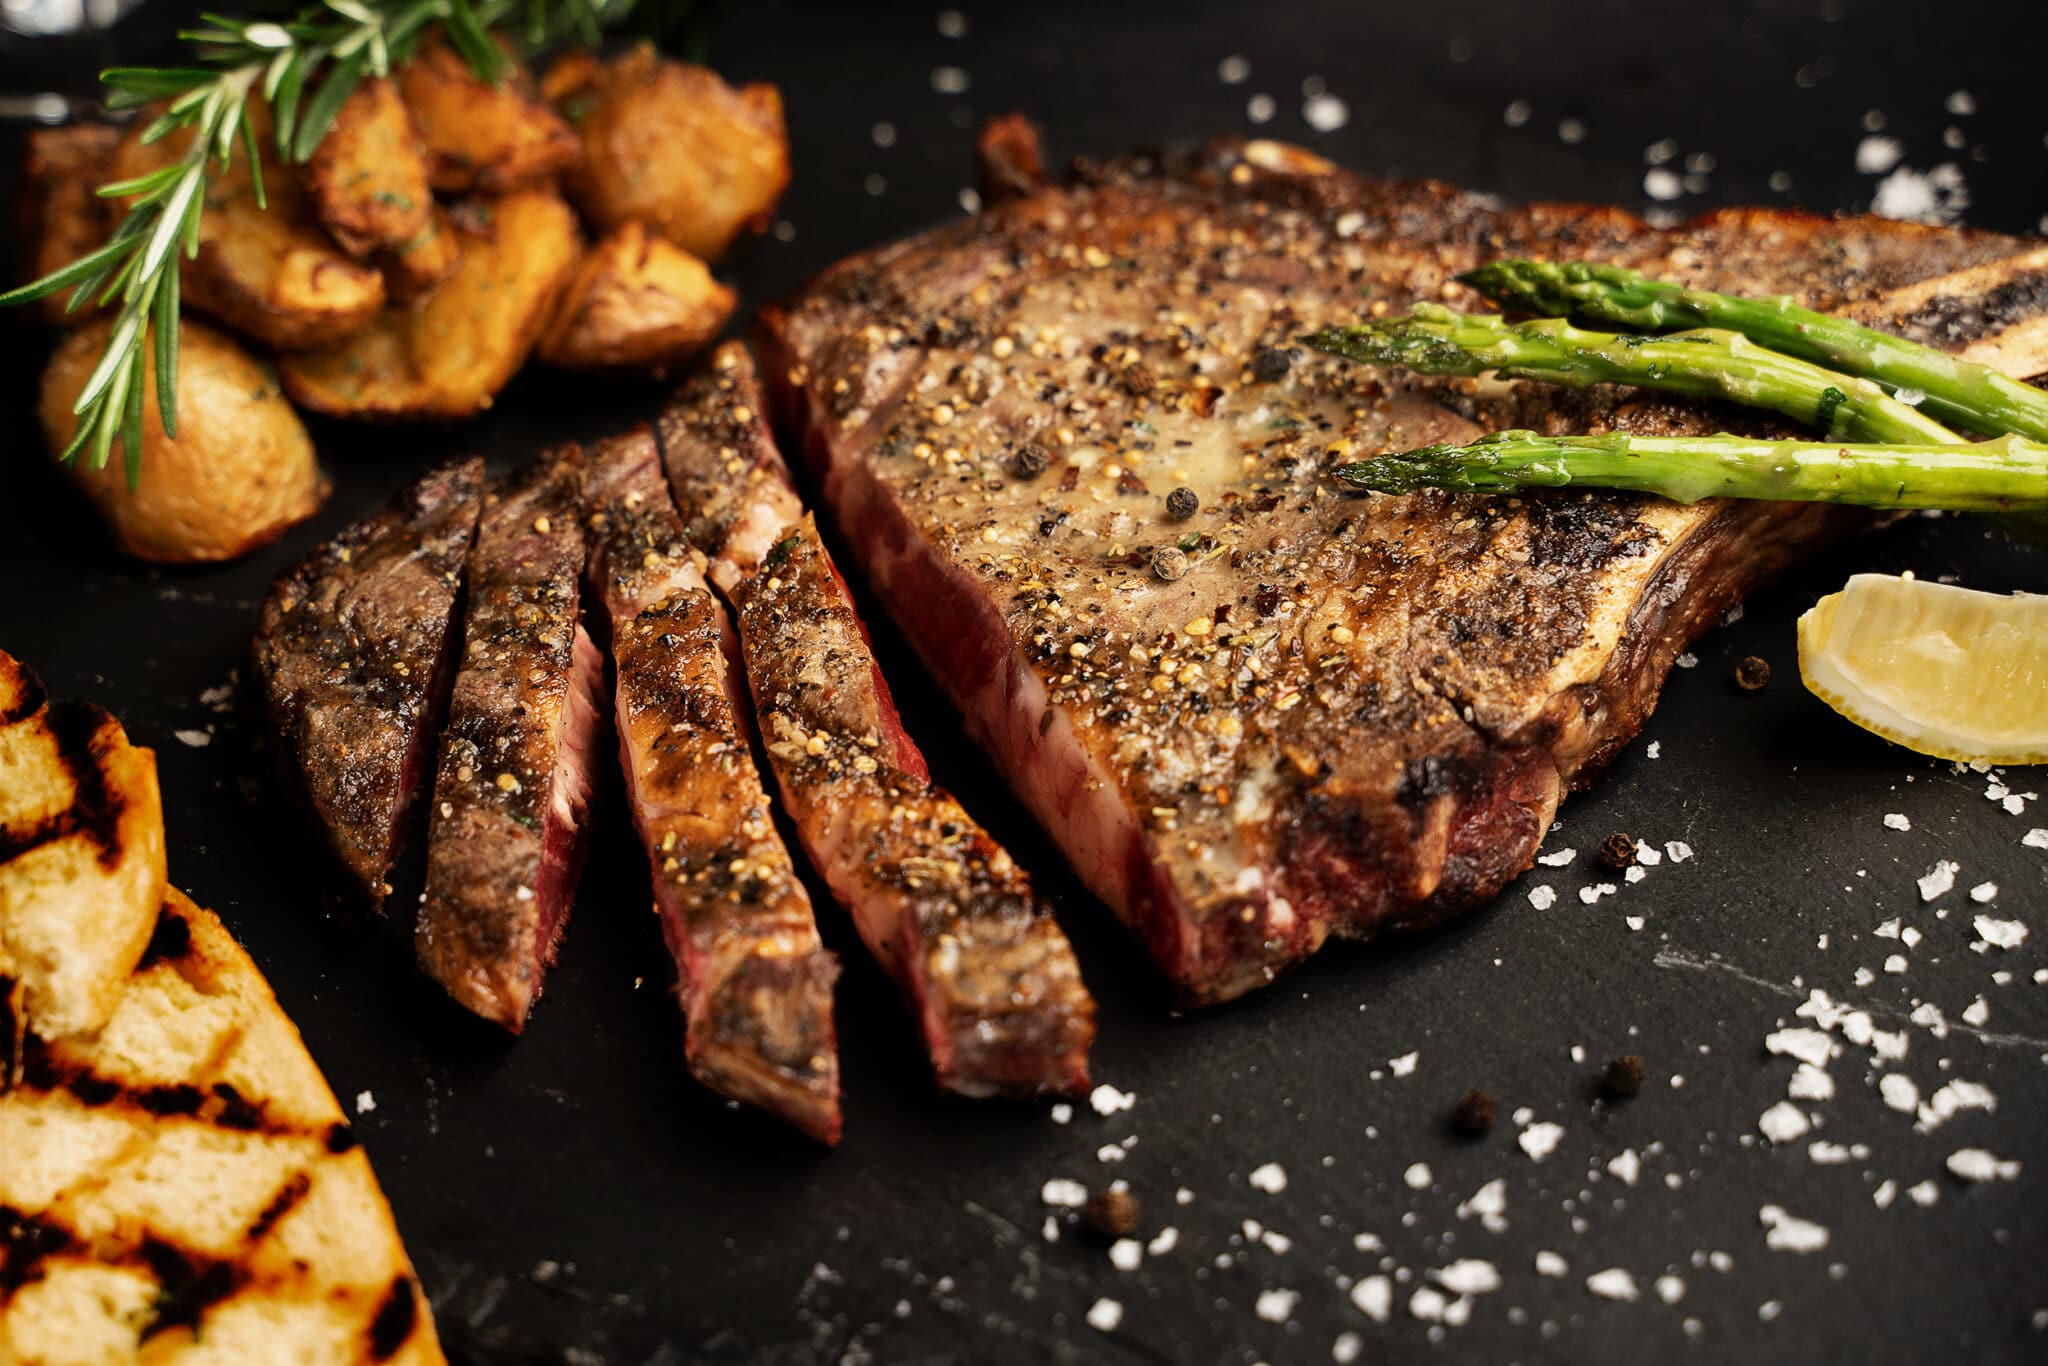 A closeup of a ribeye steak, well seasoned and medium rare, partially cut into strips, with sides of asparagus, potatoes and char-grilled toast.